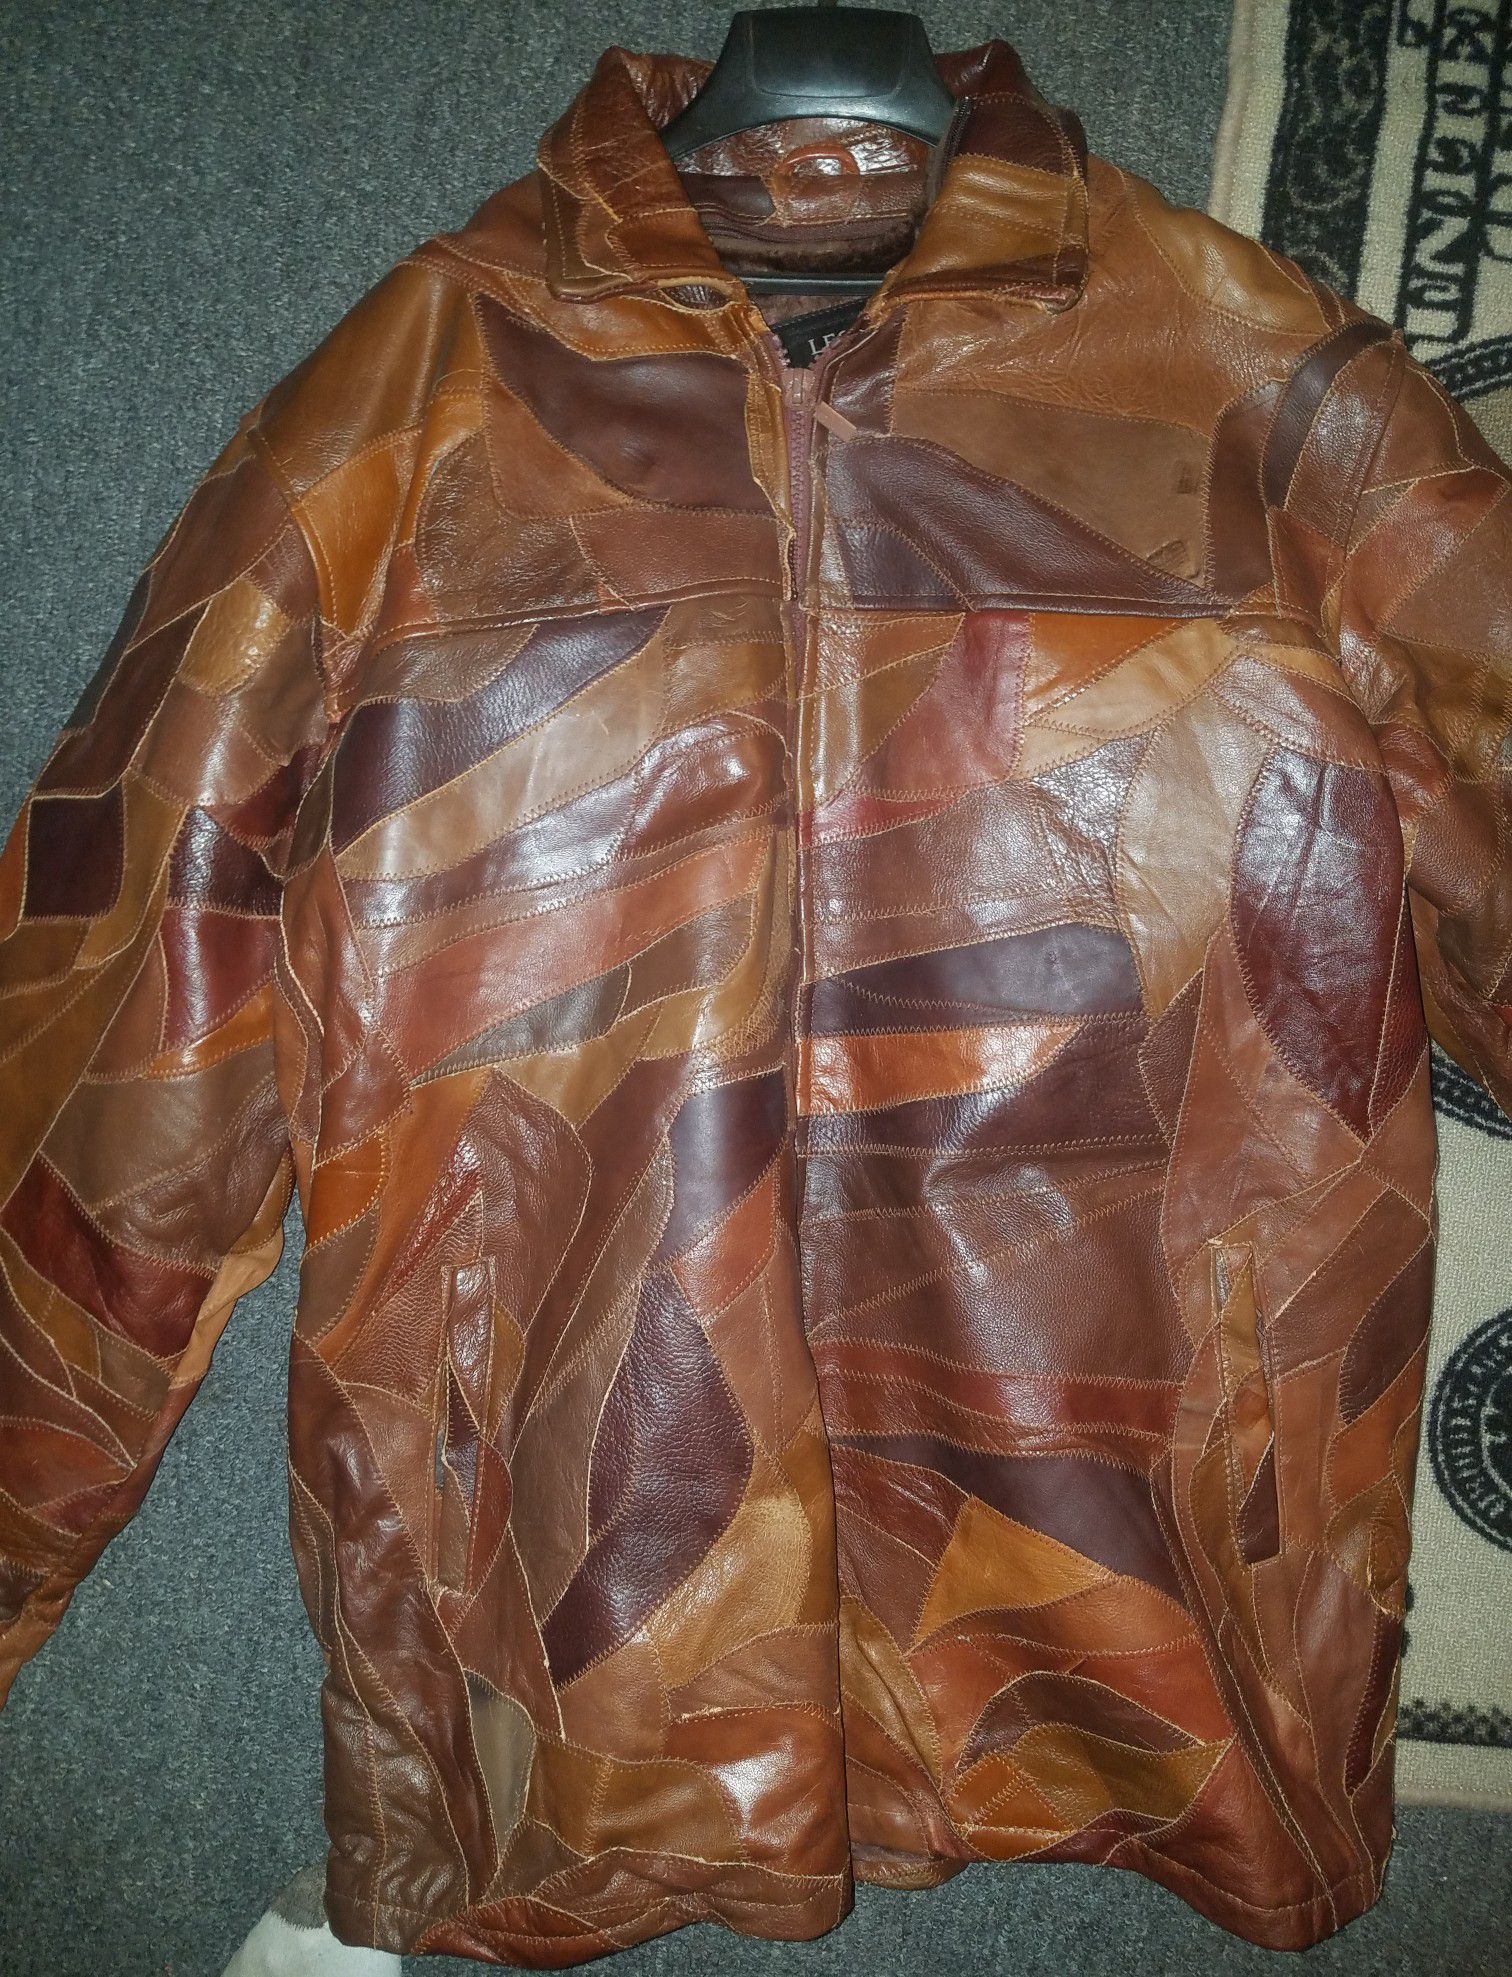 New size 4X mens Patchwork leather jacket/lining